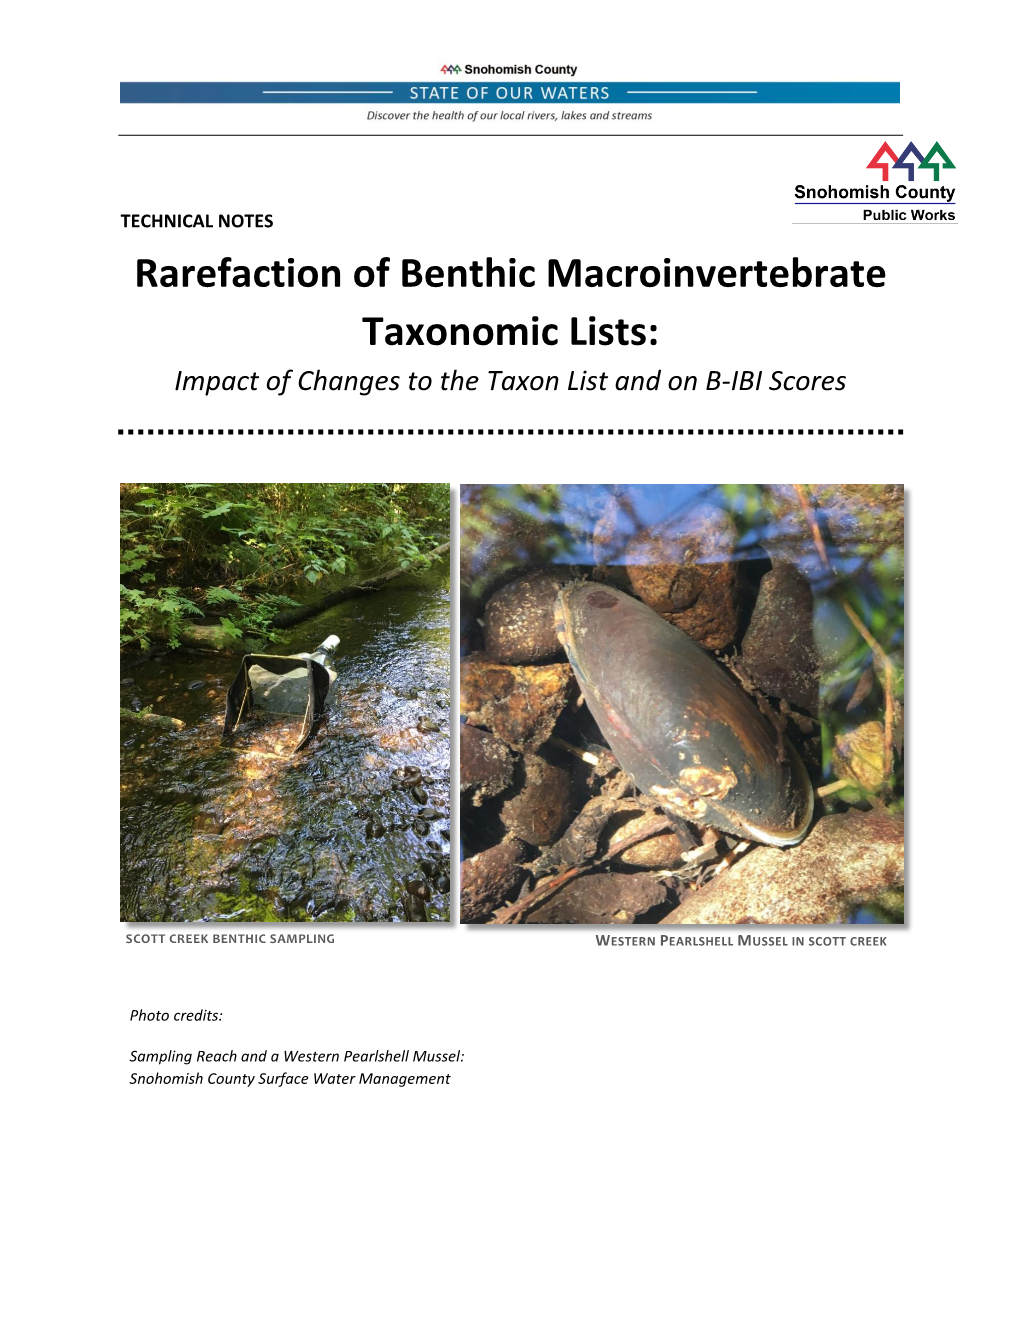 Rarefaction of Benthic Macroinvertebrate Taxonomic Lists: Impact of Changes to the Taxon List and on B-IBI Scores